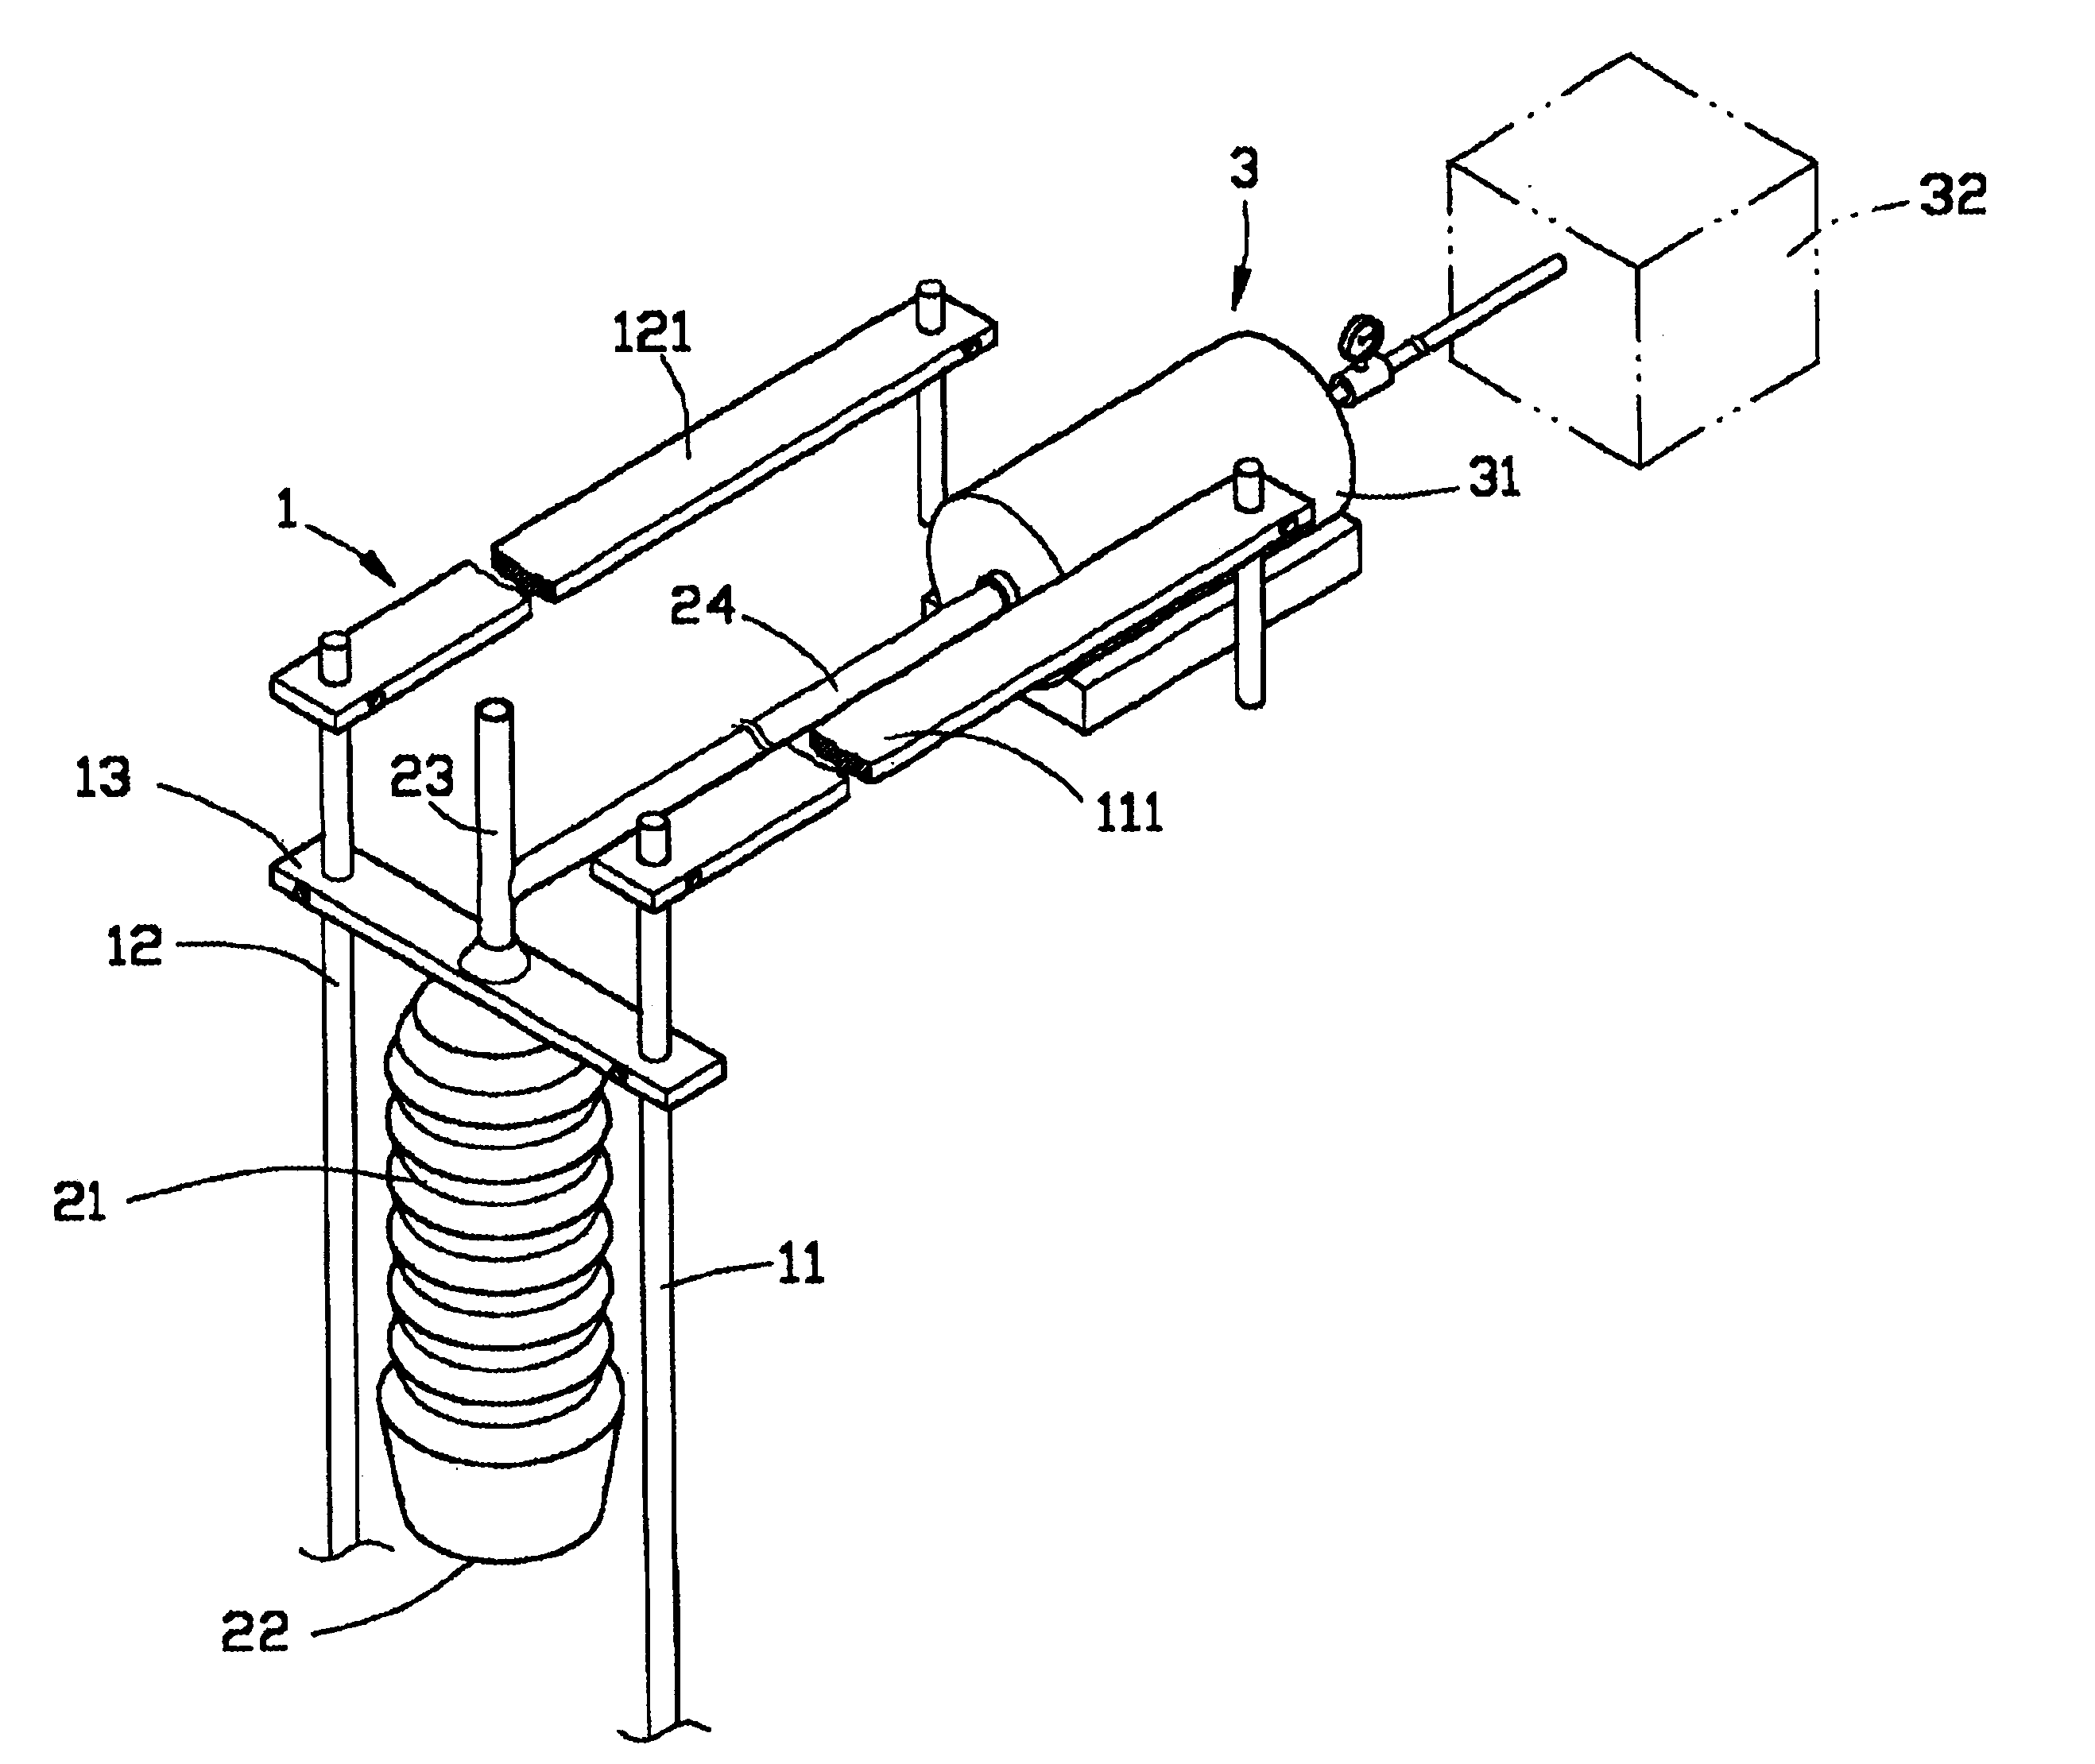 Power generating machine with a bellows adaptable to sea waves so as to drive a generator